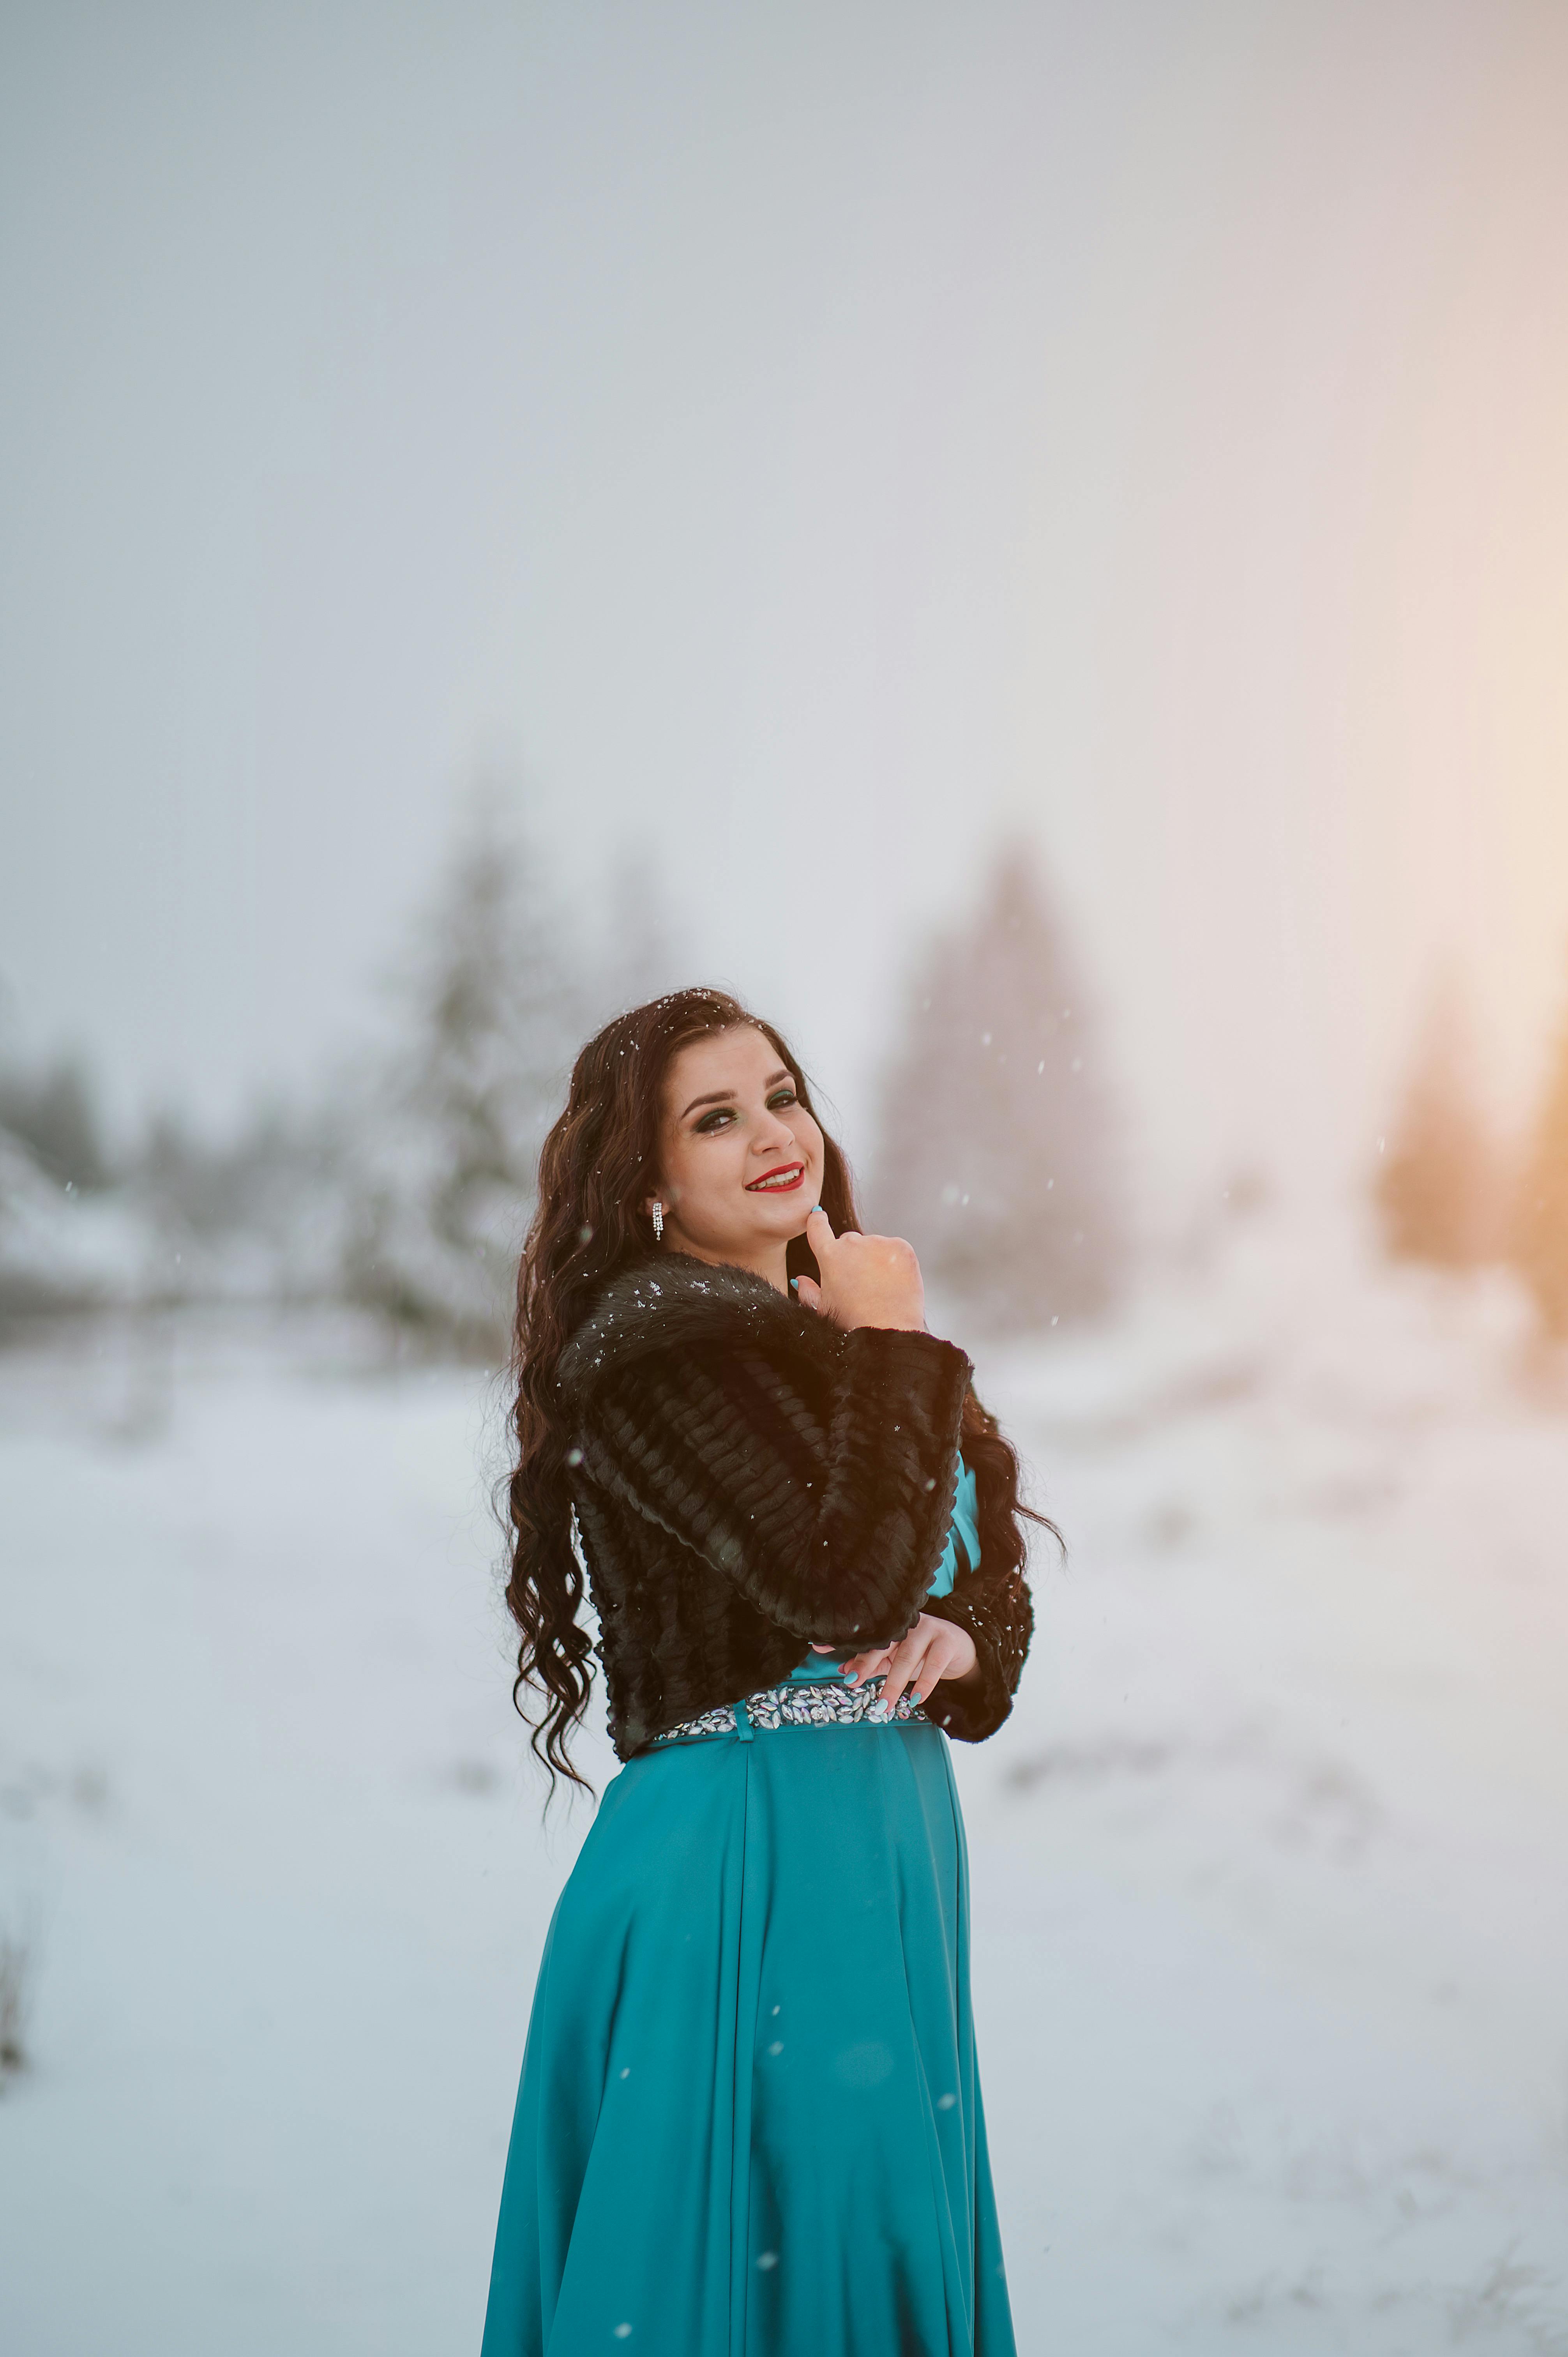 Winter Photoshoot Ideas: 7 Ideas for Unique Shots in the Cold